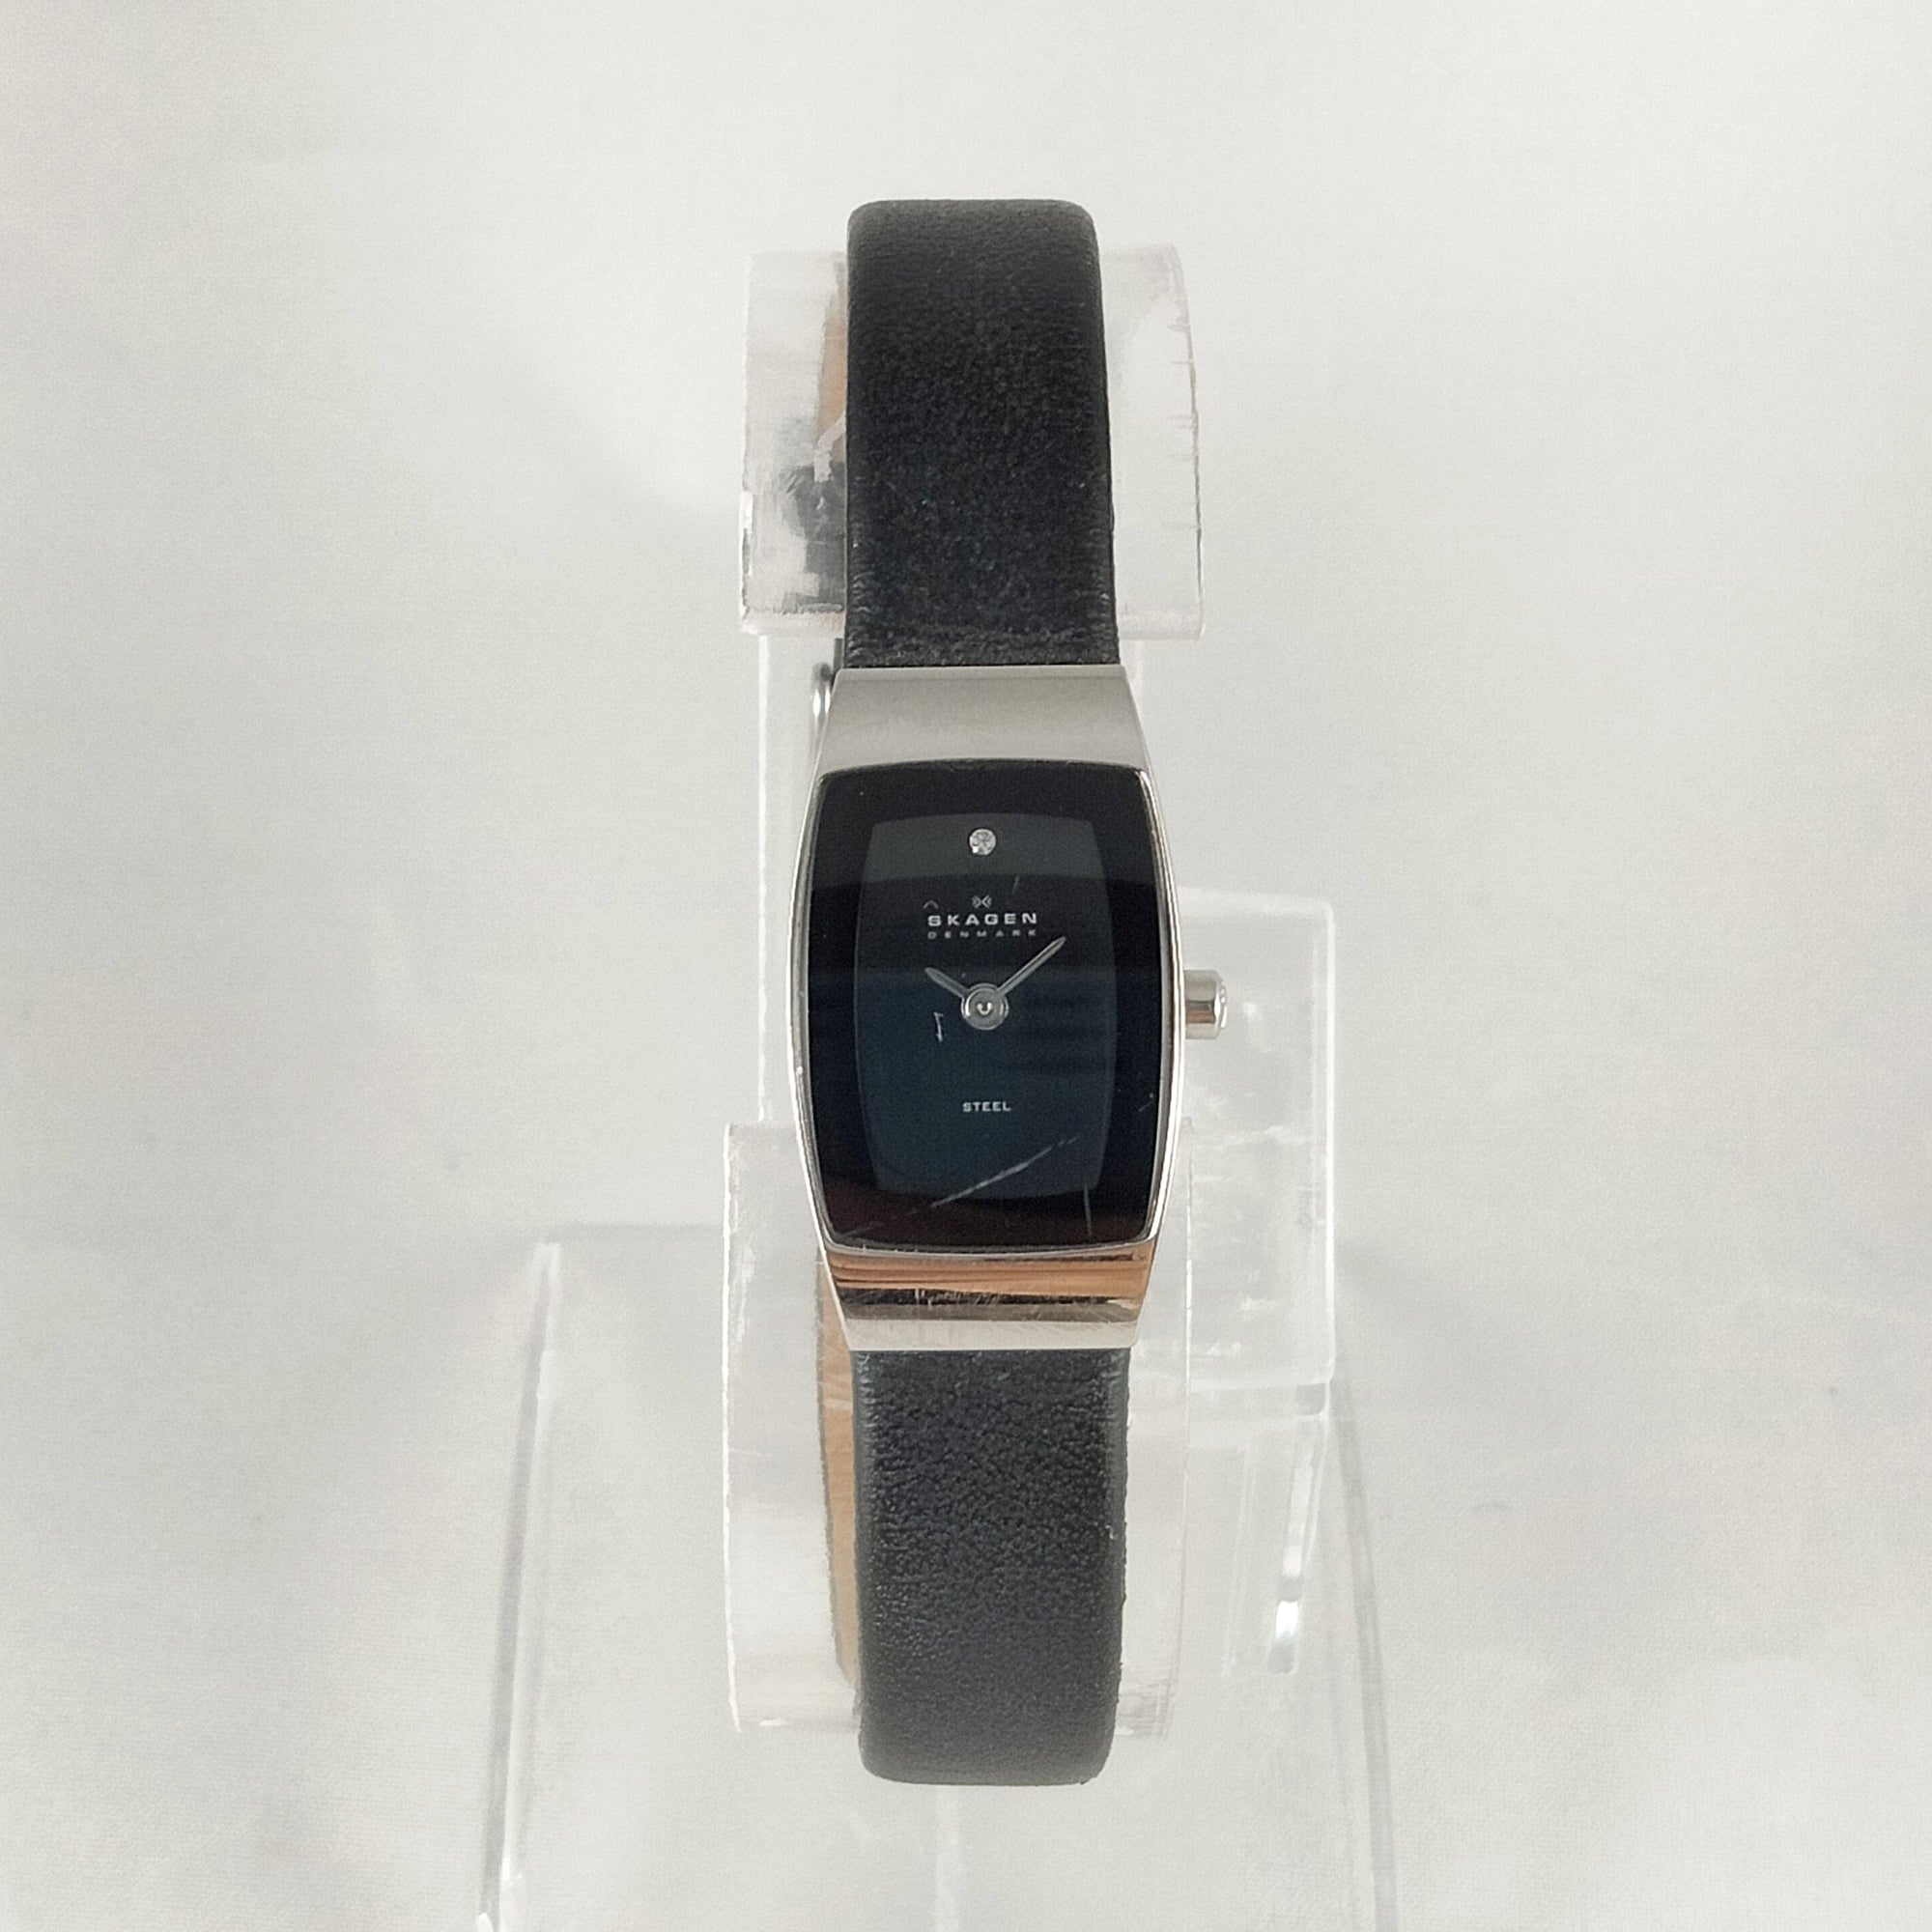 I Like Mikes Mid Century Modern Watches Skagen Stainless Steel Women's Watch, Elongated Black Dial, Black Genuine Leather Strap